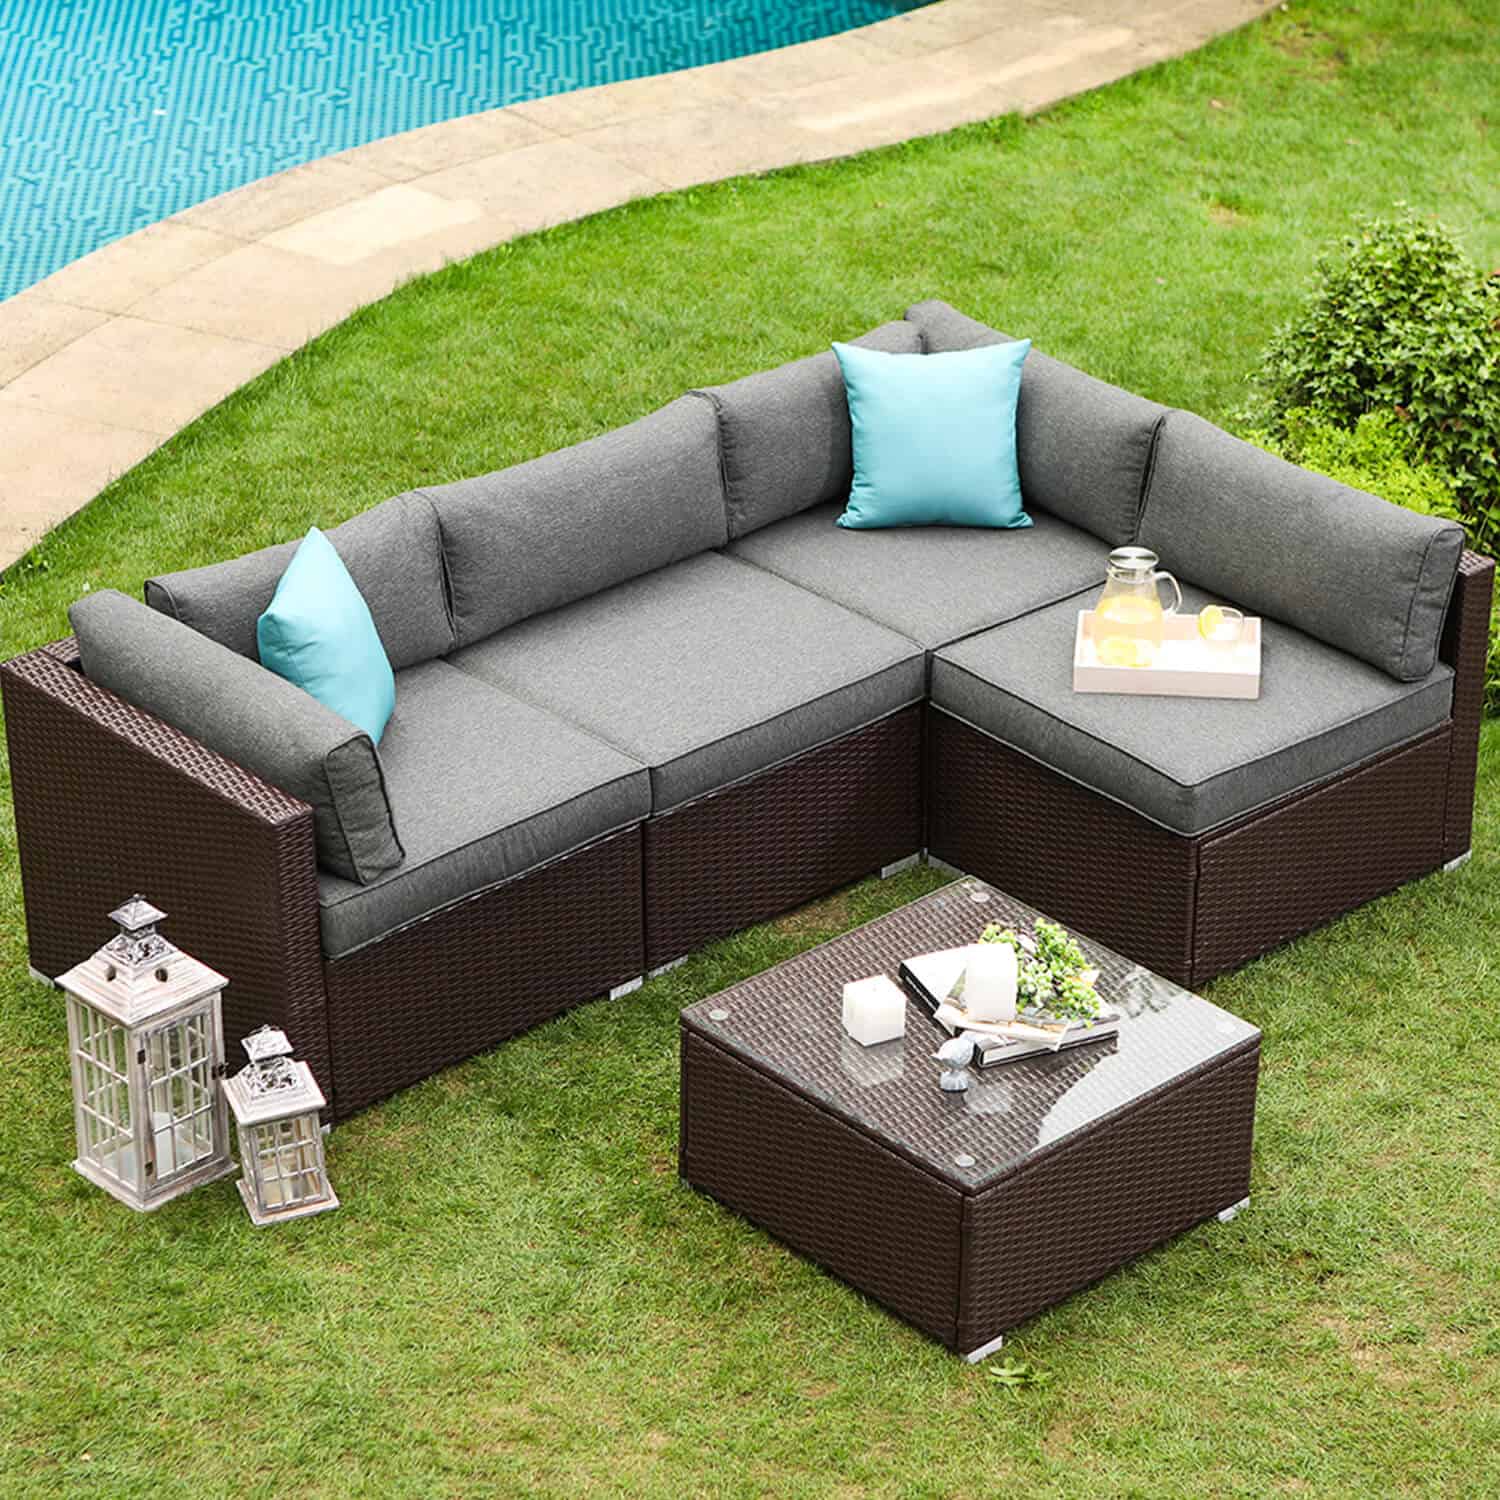 Serein 5 Piece L shaped Wicker Outdoor Sectional